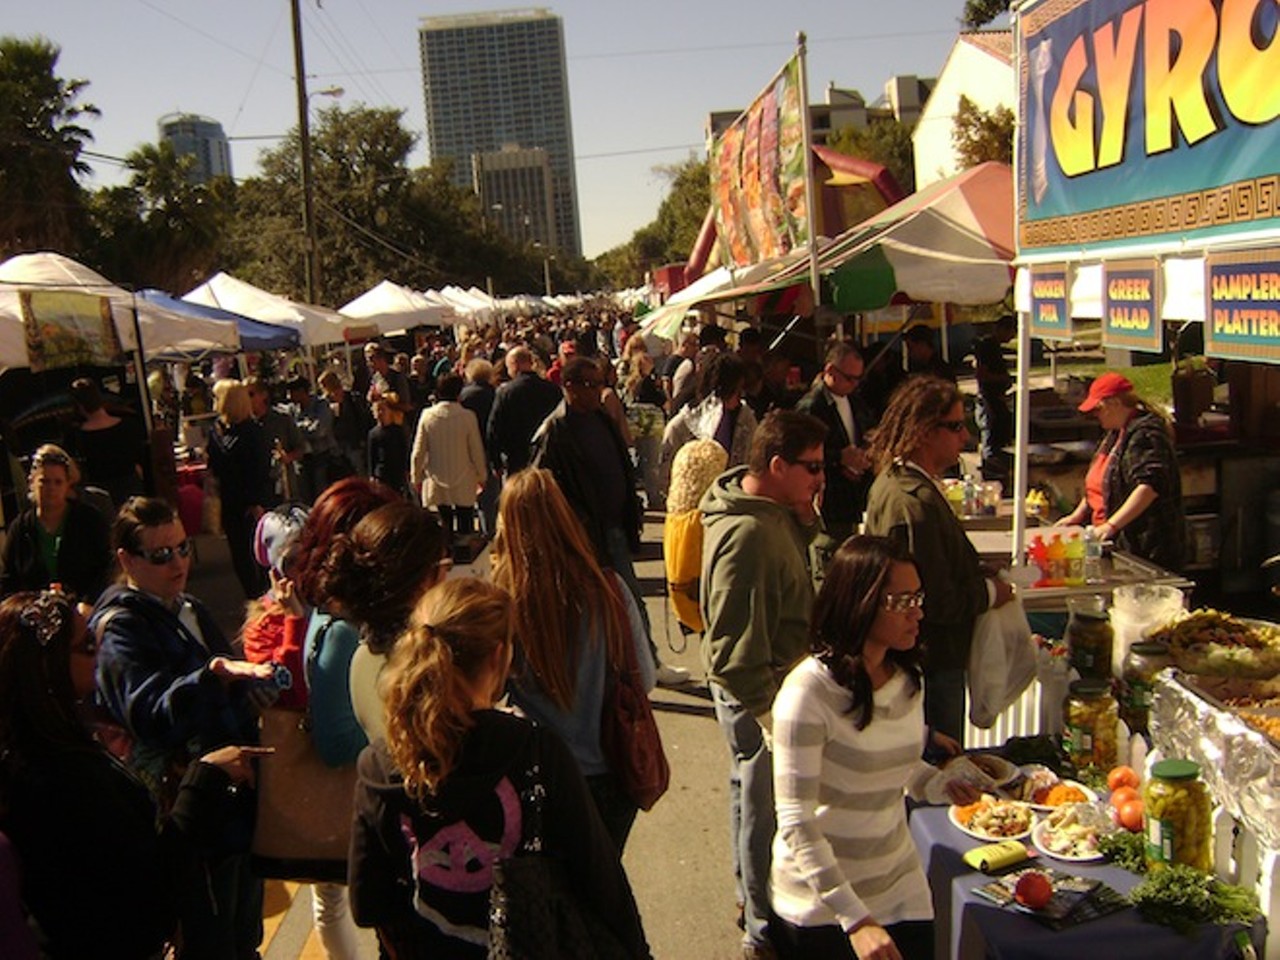 Fall Fiesta in the Park
Saturday-Sunday, Nov. 2-3
10 a.m.-5 p.m. Saturday, noon-5 p.m. Sunday
Lake Eola Park
407-855-0606
fiestainthepark.com
free
Fall is the season for outdoor festivals in Orlando, and the weather is usually perfectly cool for the annual Fall Fiesta in the Park, giving you the ideal excuse to spend a day (or two!) outside perusing arts and crafts booths. Each year people from all over the Central Florida area come in droves to this expansive weekend-long event, as more than 600 vendors set up shop all the way around Lake Eola to sell all sorts of goodies &#150; artwork, jewelry, clothing, crafts, handmade pieces, food items and more. Last year we scored novel finds like locally made dried pasta and hand-sewn pet accessories, but you never know what kind of treasures you&#146;ll scoop up while shopping at this sprawling fiesta. &#150; Aimee Vitek